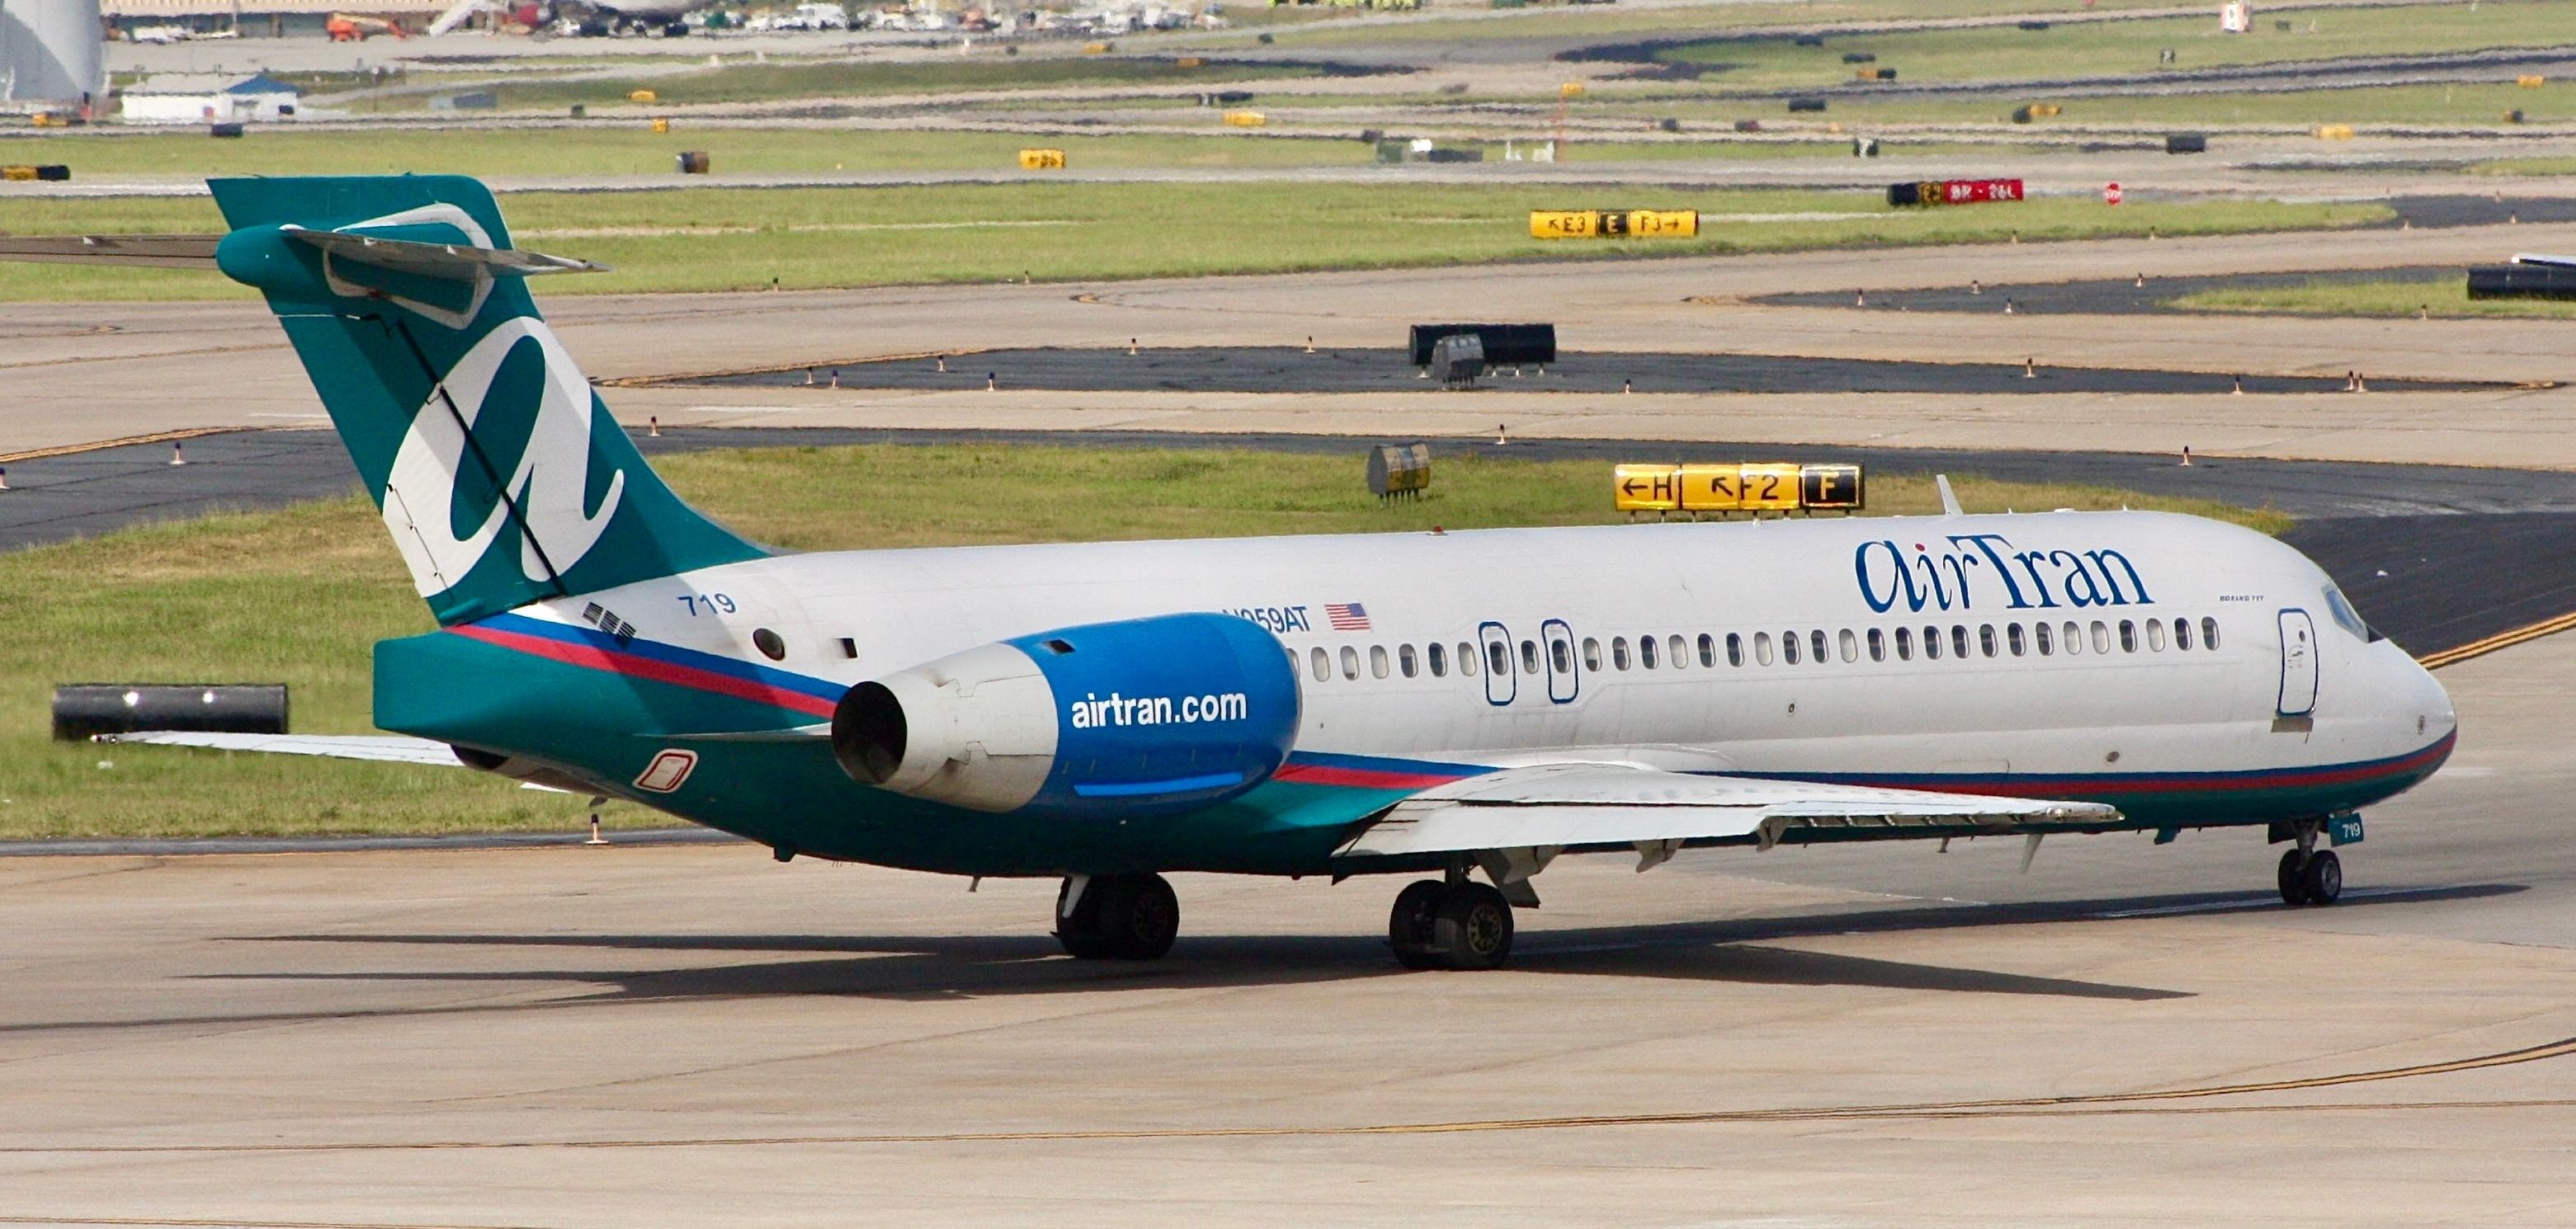 An AirTran Airways Boeing 717 on a taxiway.